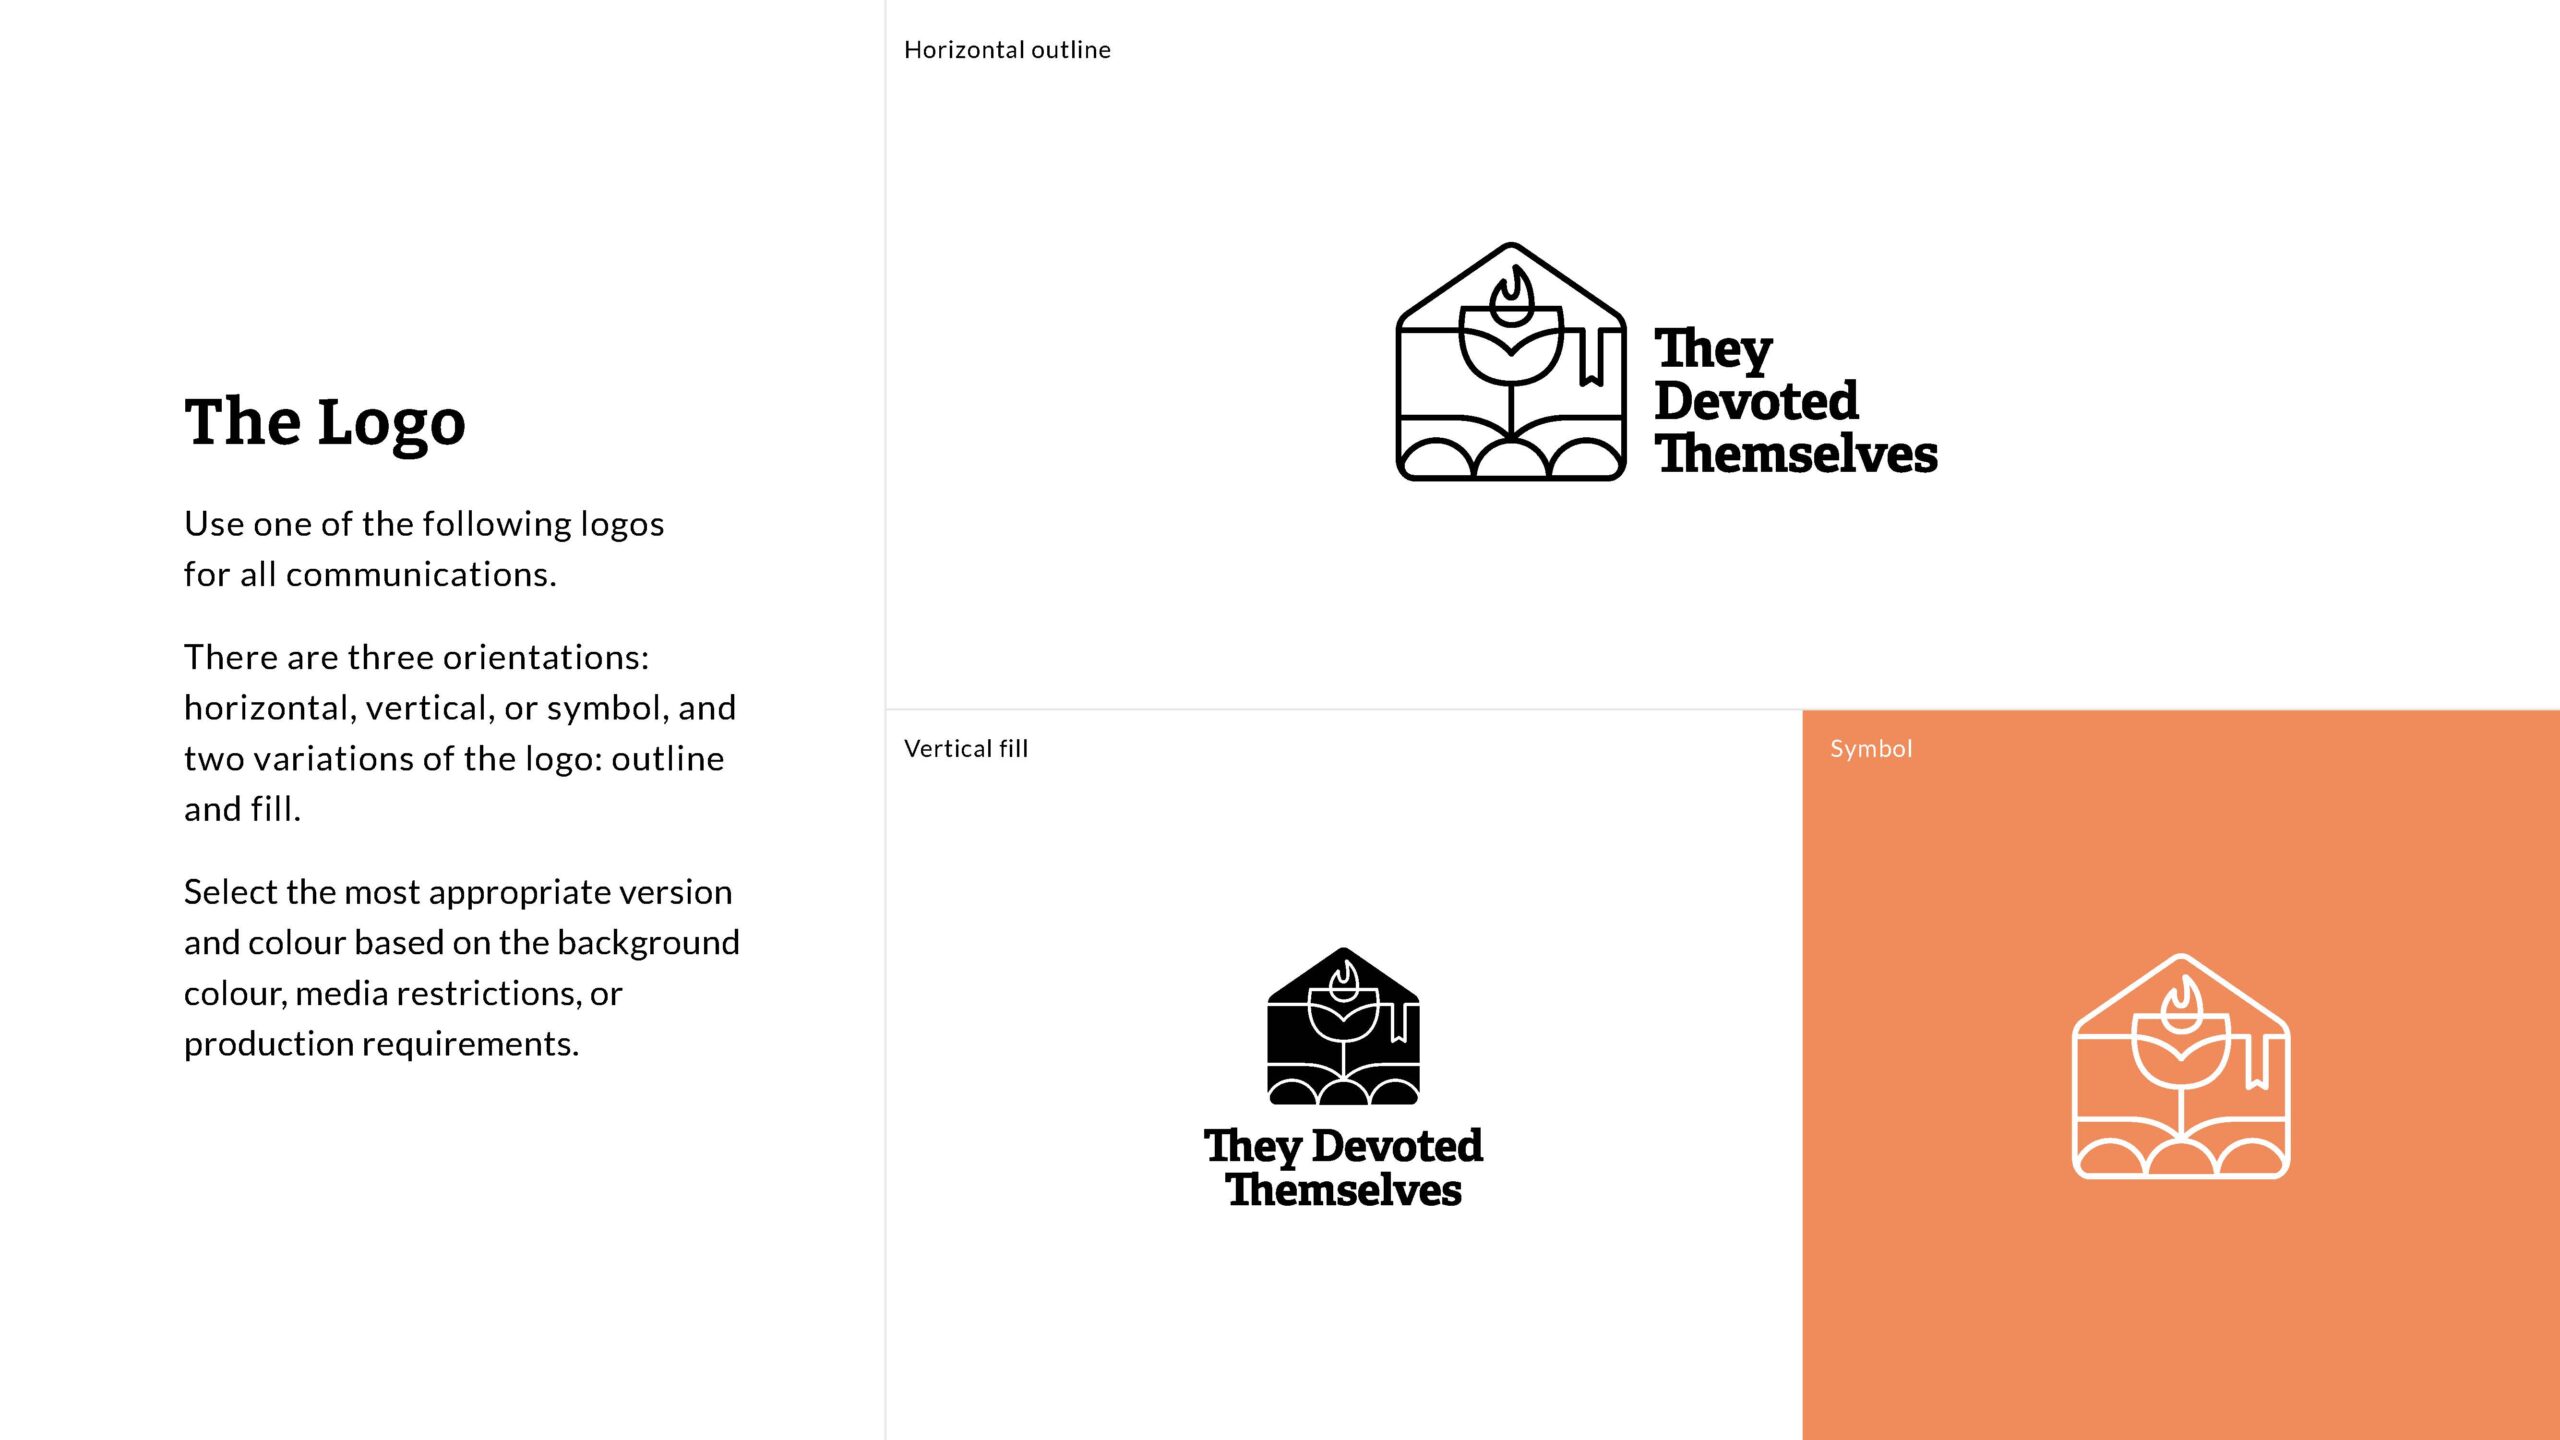 The Devoted Themselves brand guidelines